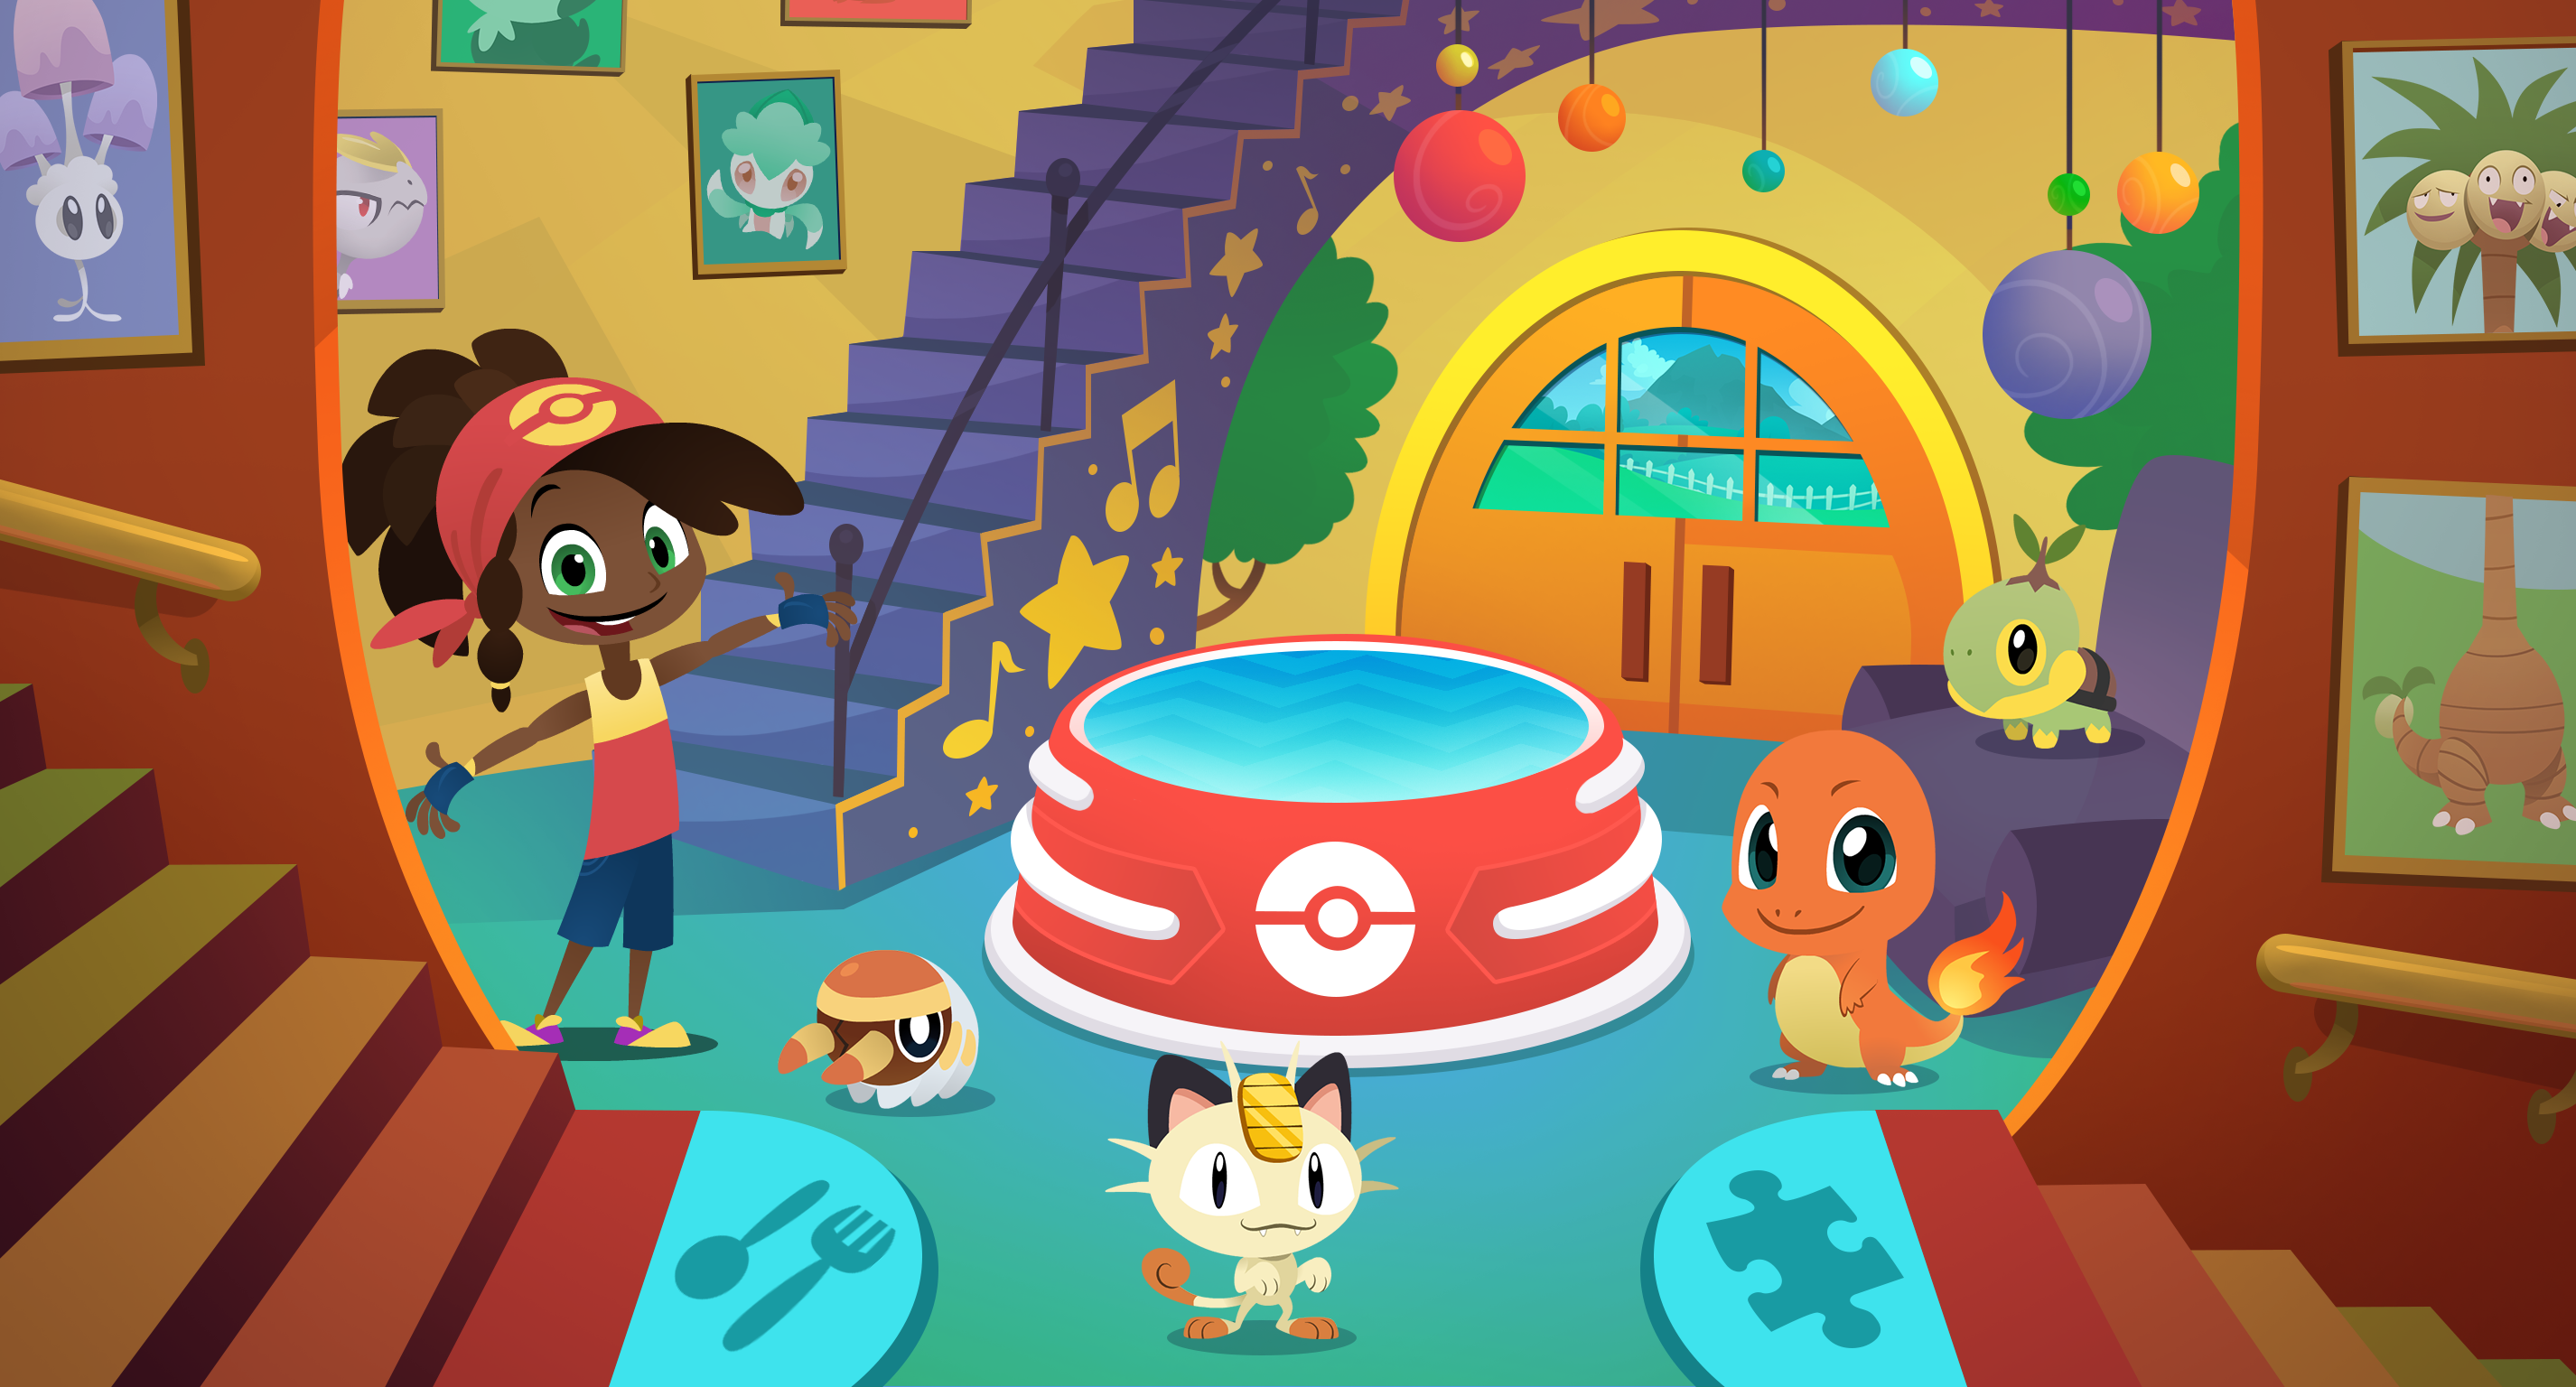 Preschoolers get their own Pokémon game with launch of Pokémon Playhouse